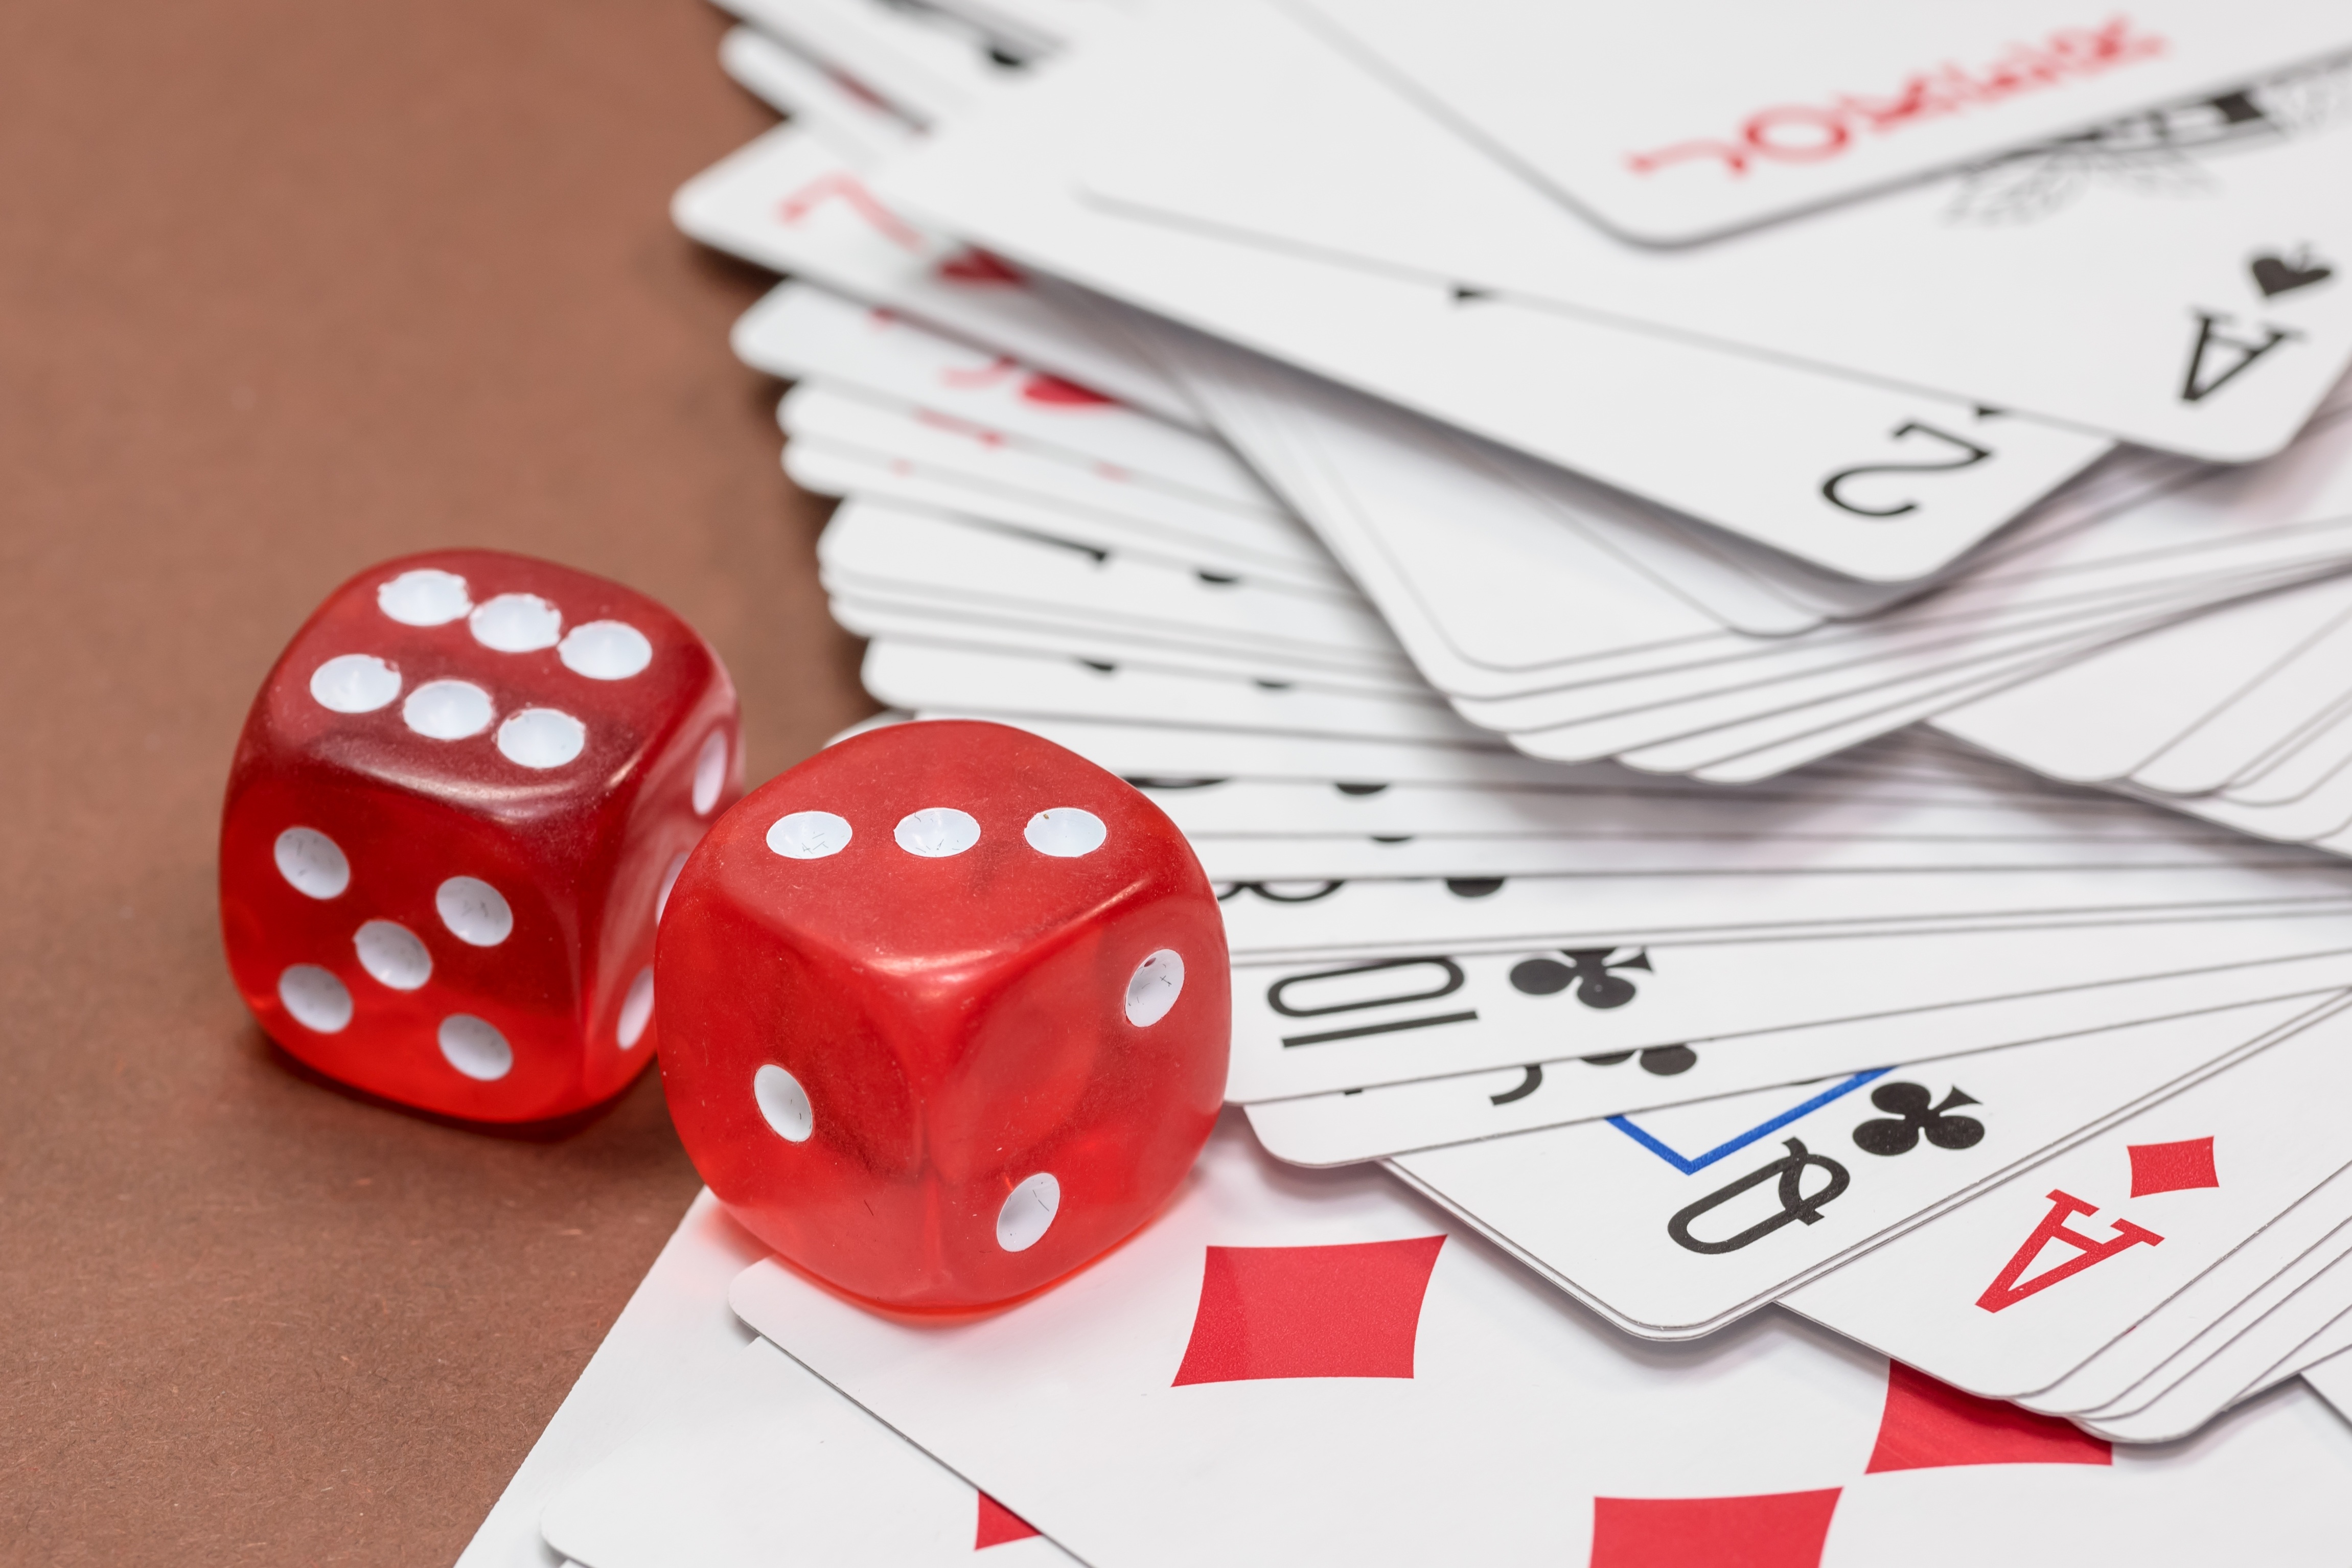 Free photo A game of poker with red dice